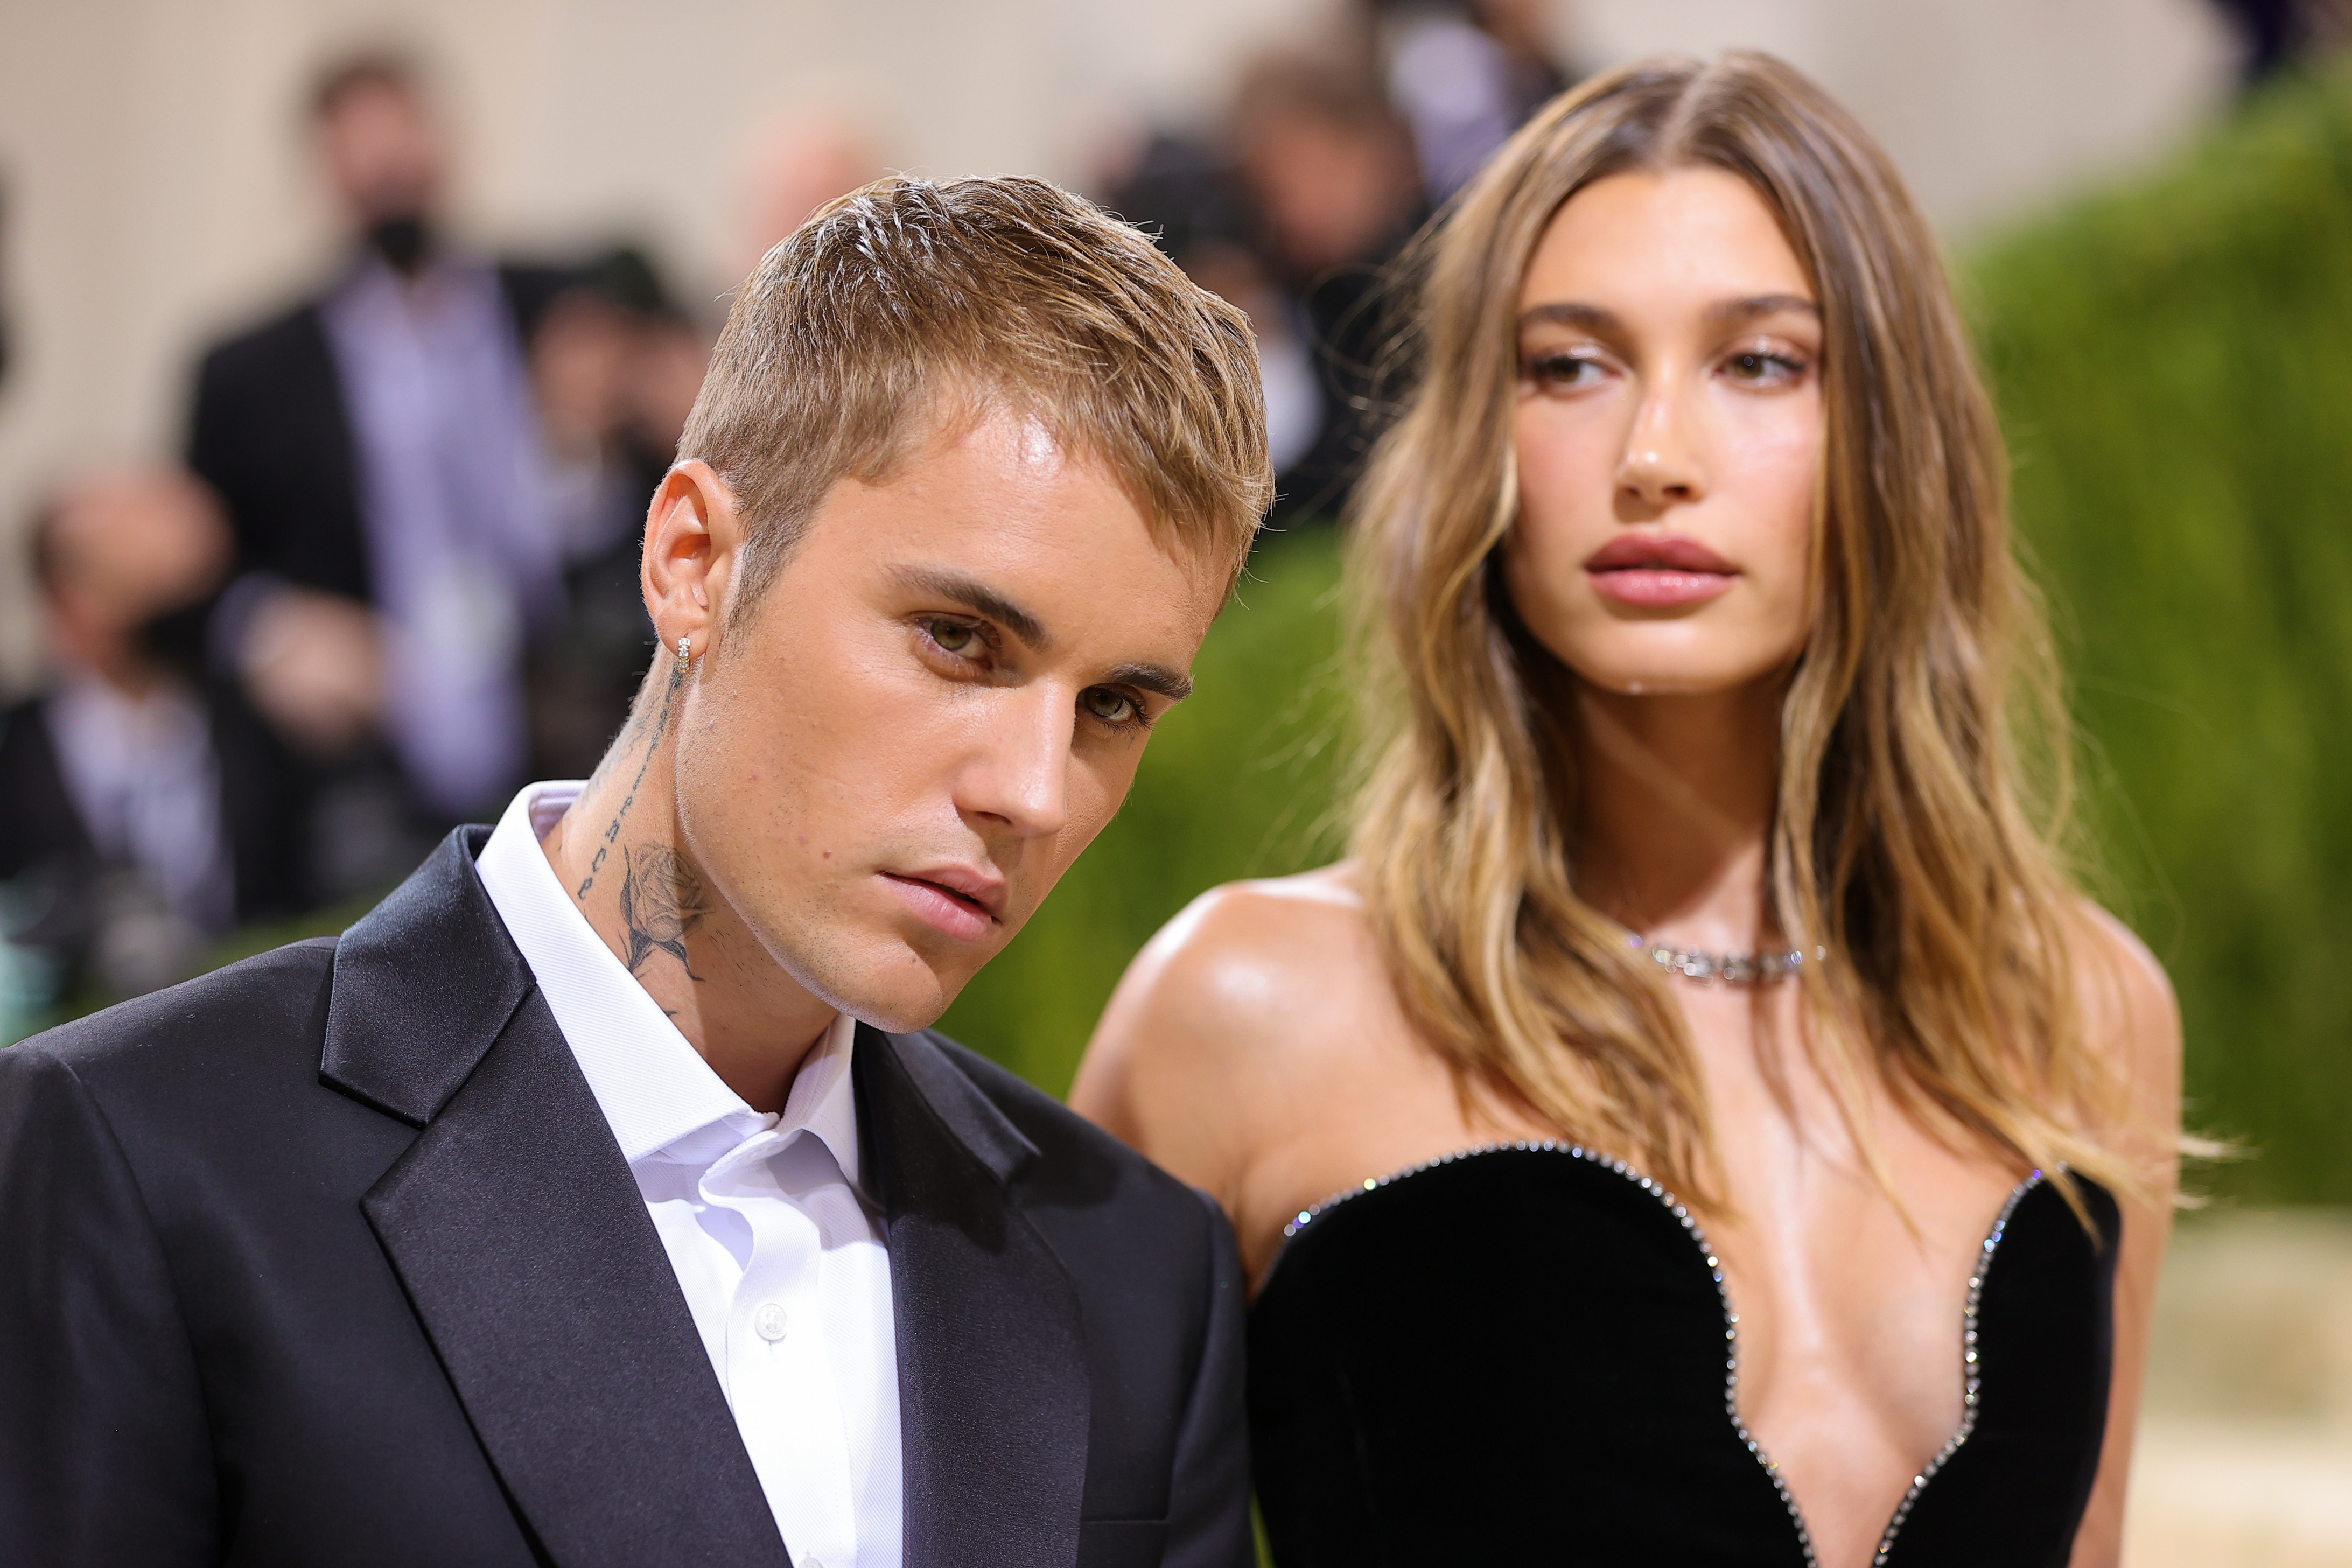 During Hailey and Justin Bieber's brief split from 2016-18, Justin moved on with Selena Gomez